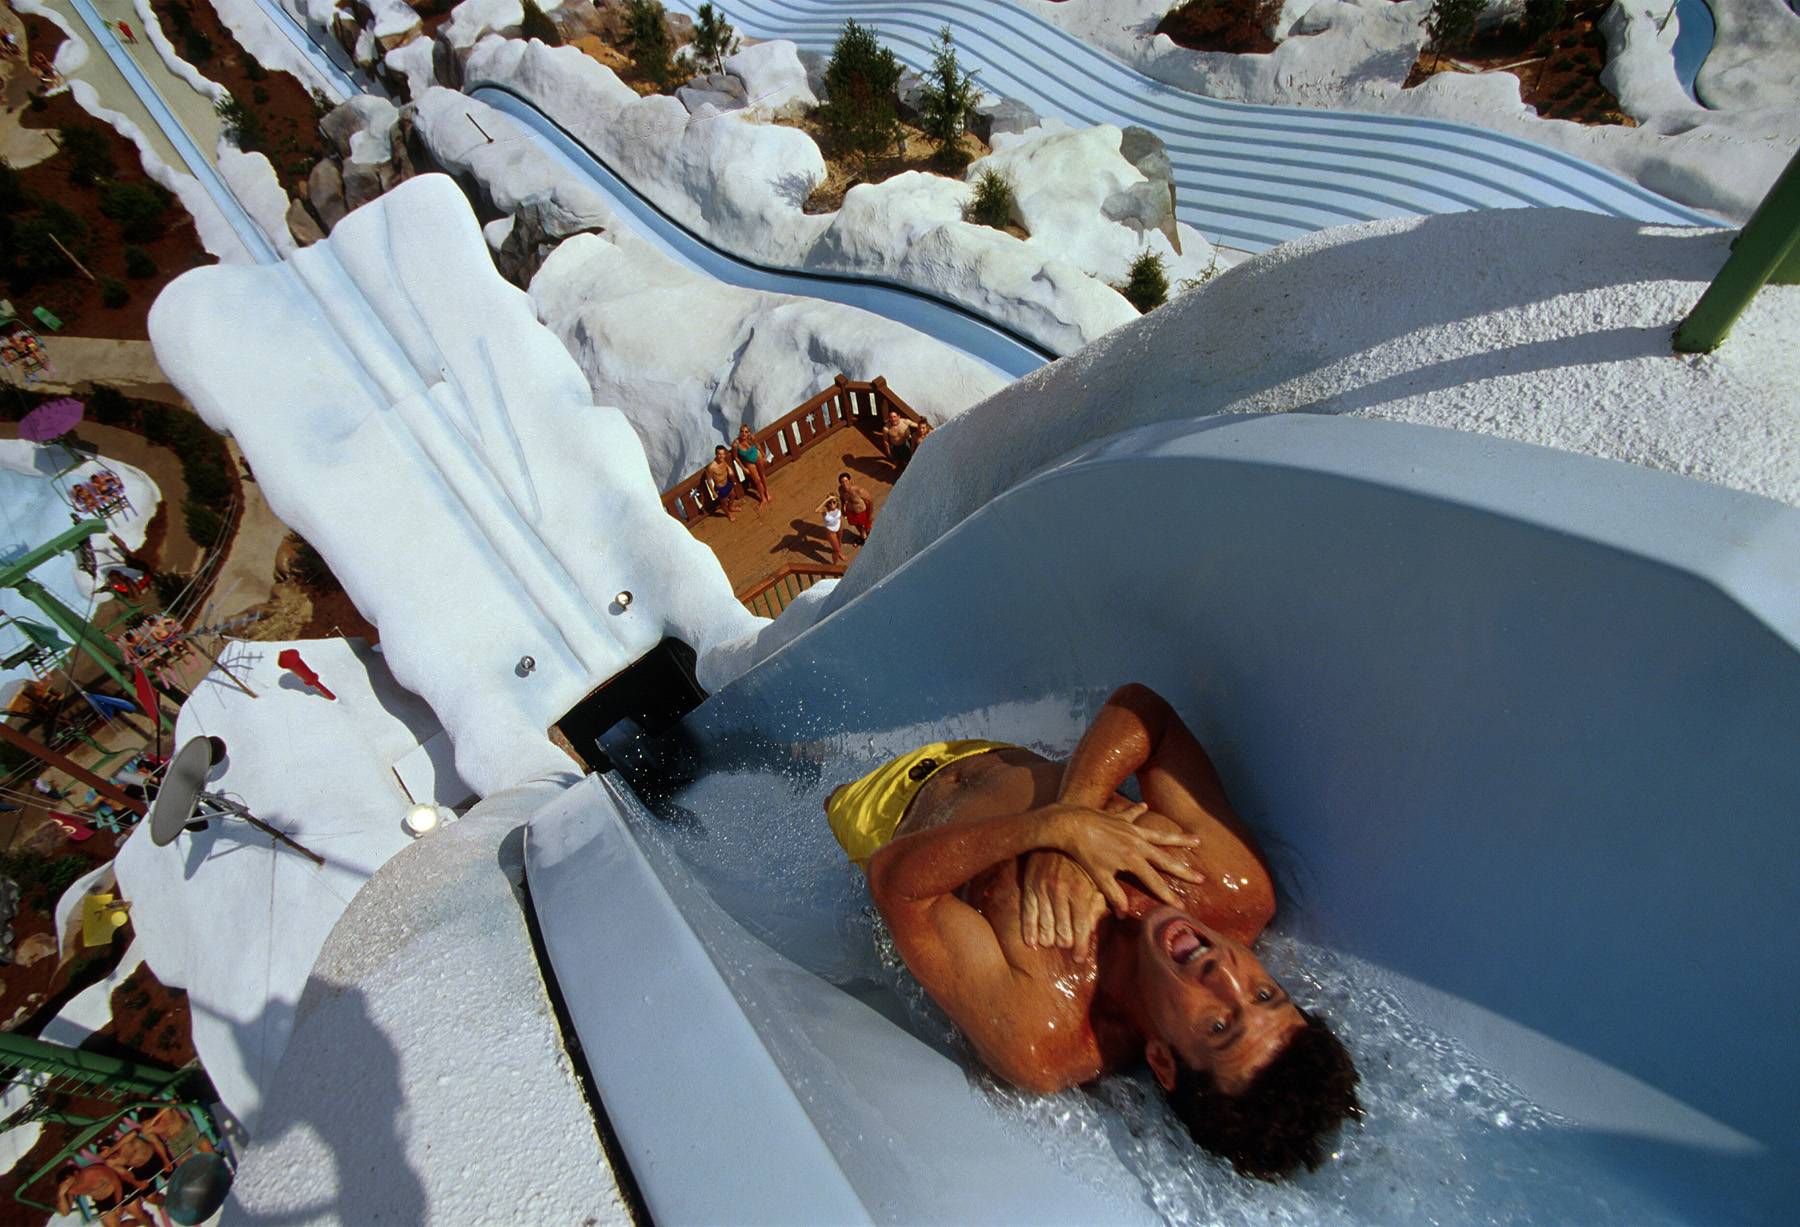 Blizzard Beach closed today and tomorrow due to freezing temperatures in the area